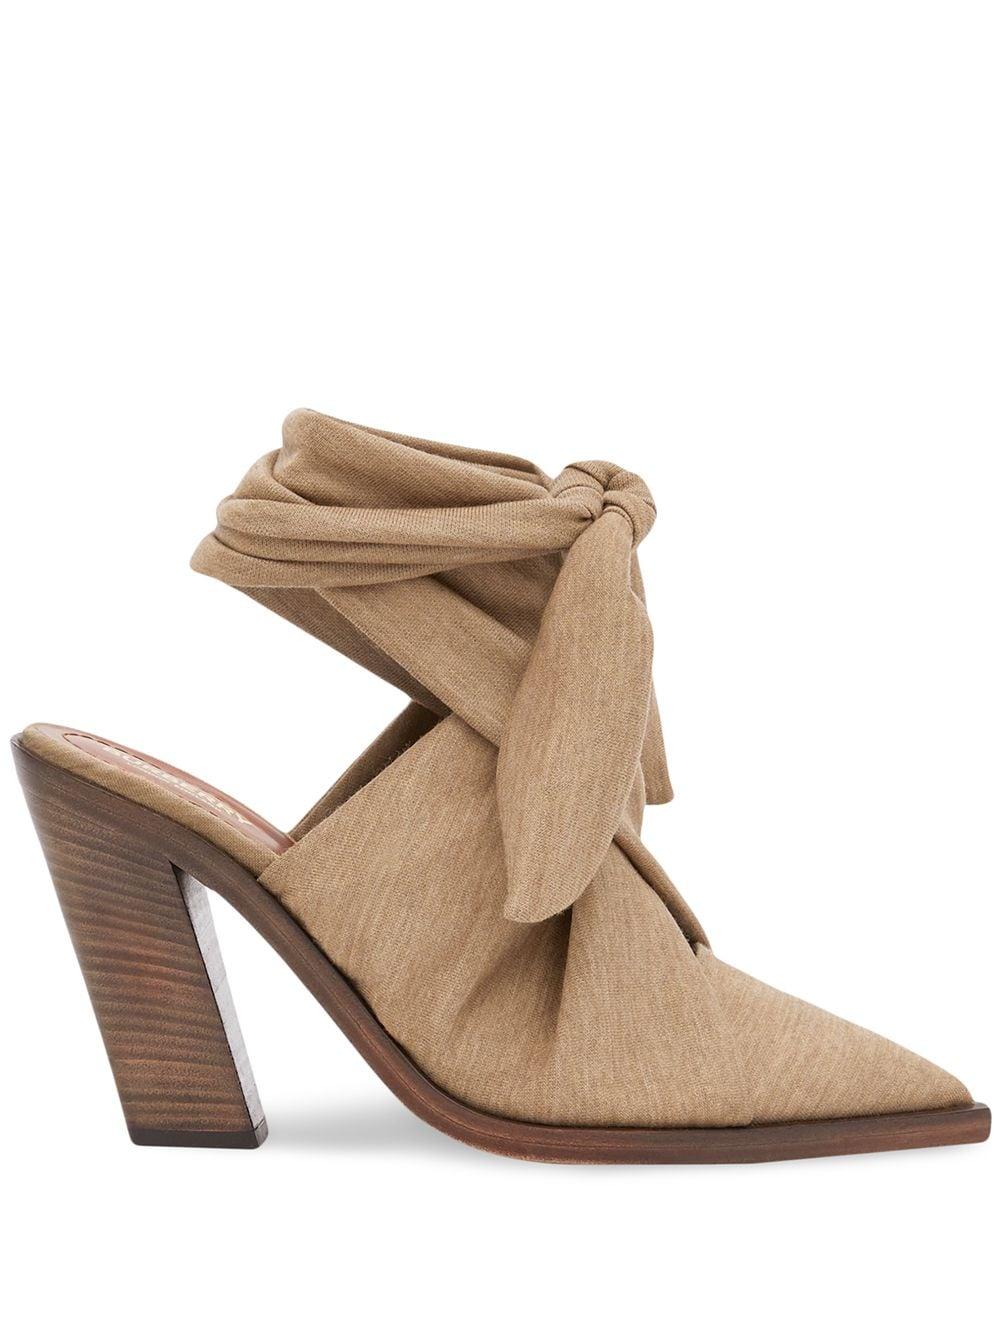 Sophisticated Elegance: Burberry Scarf Tie Mules